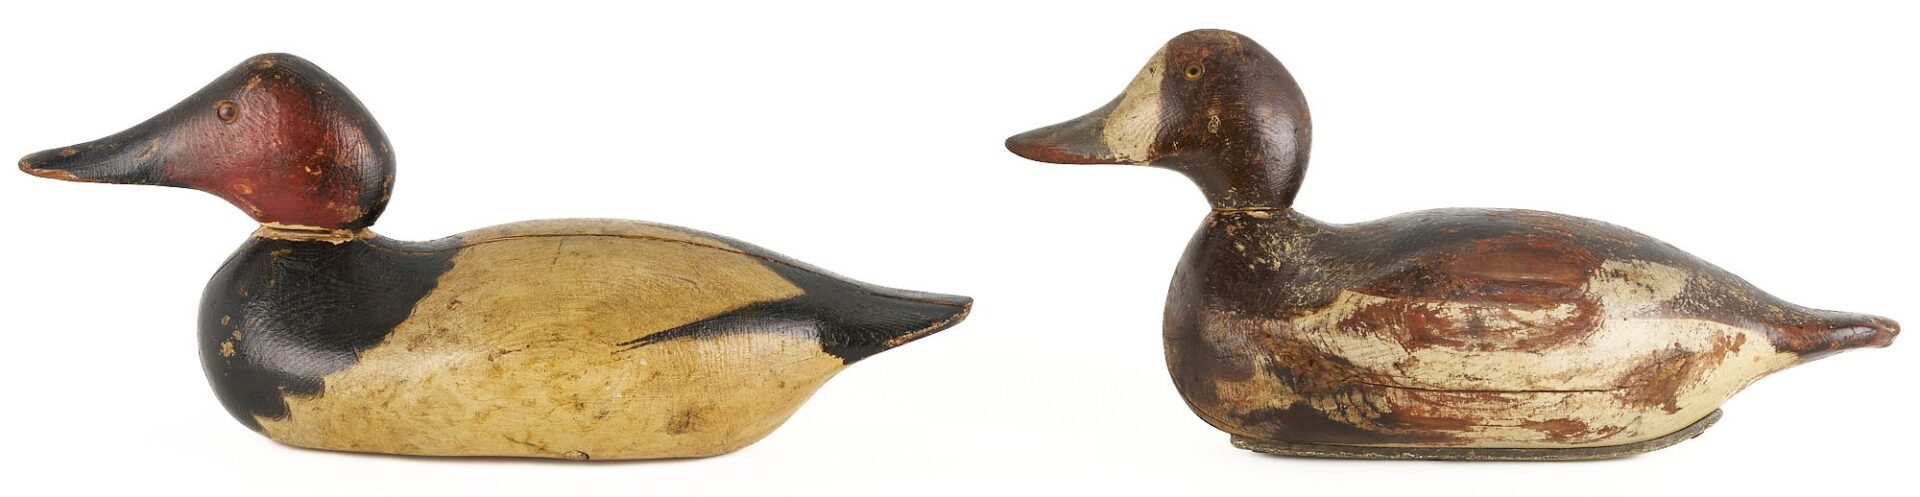 Lot 923: 4 Carved & Painted Duck Decoys, incl. Frank Resop